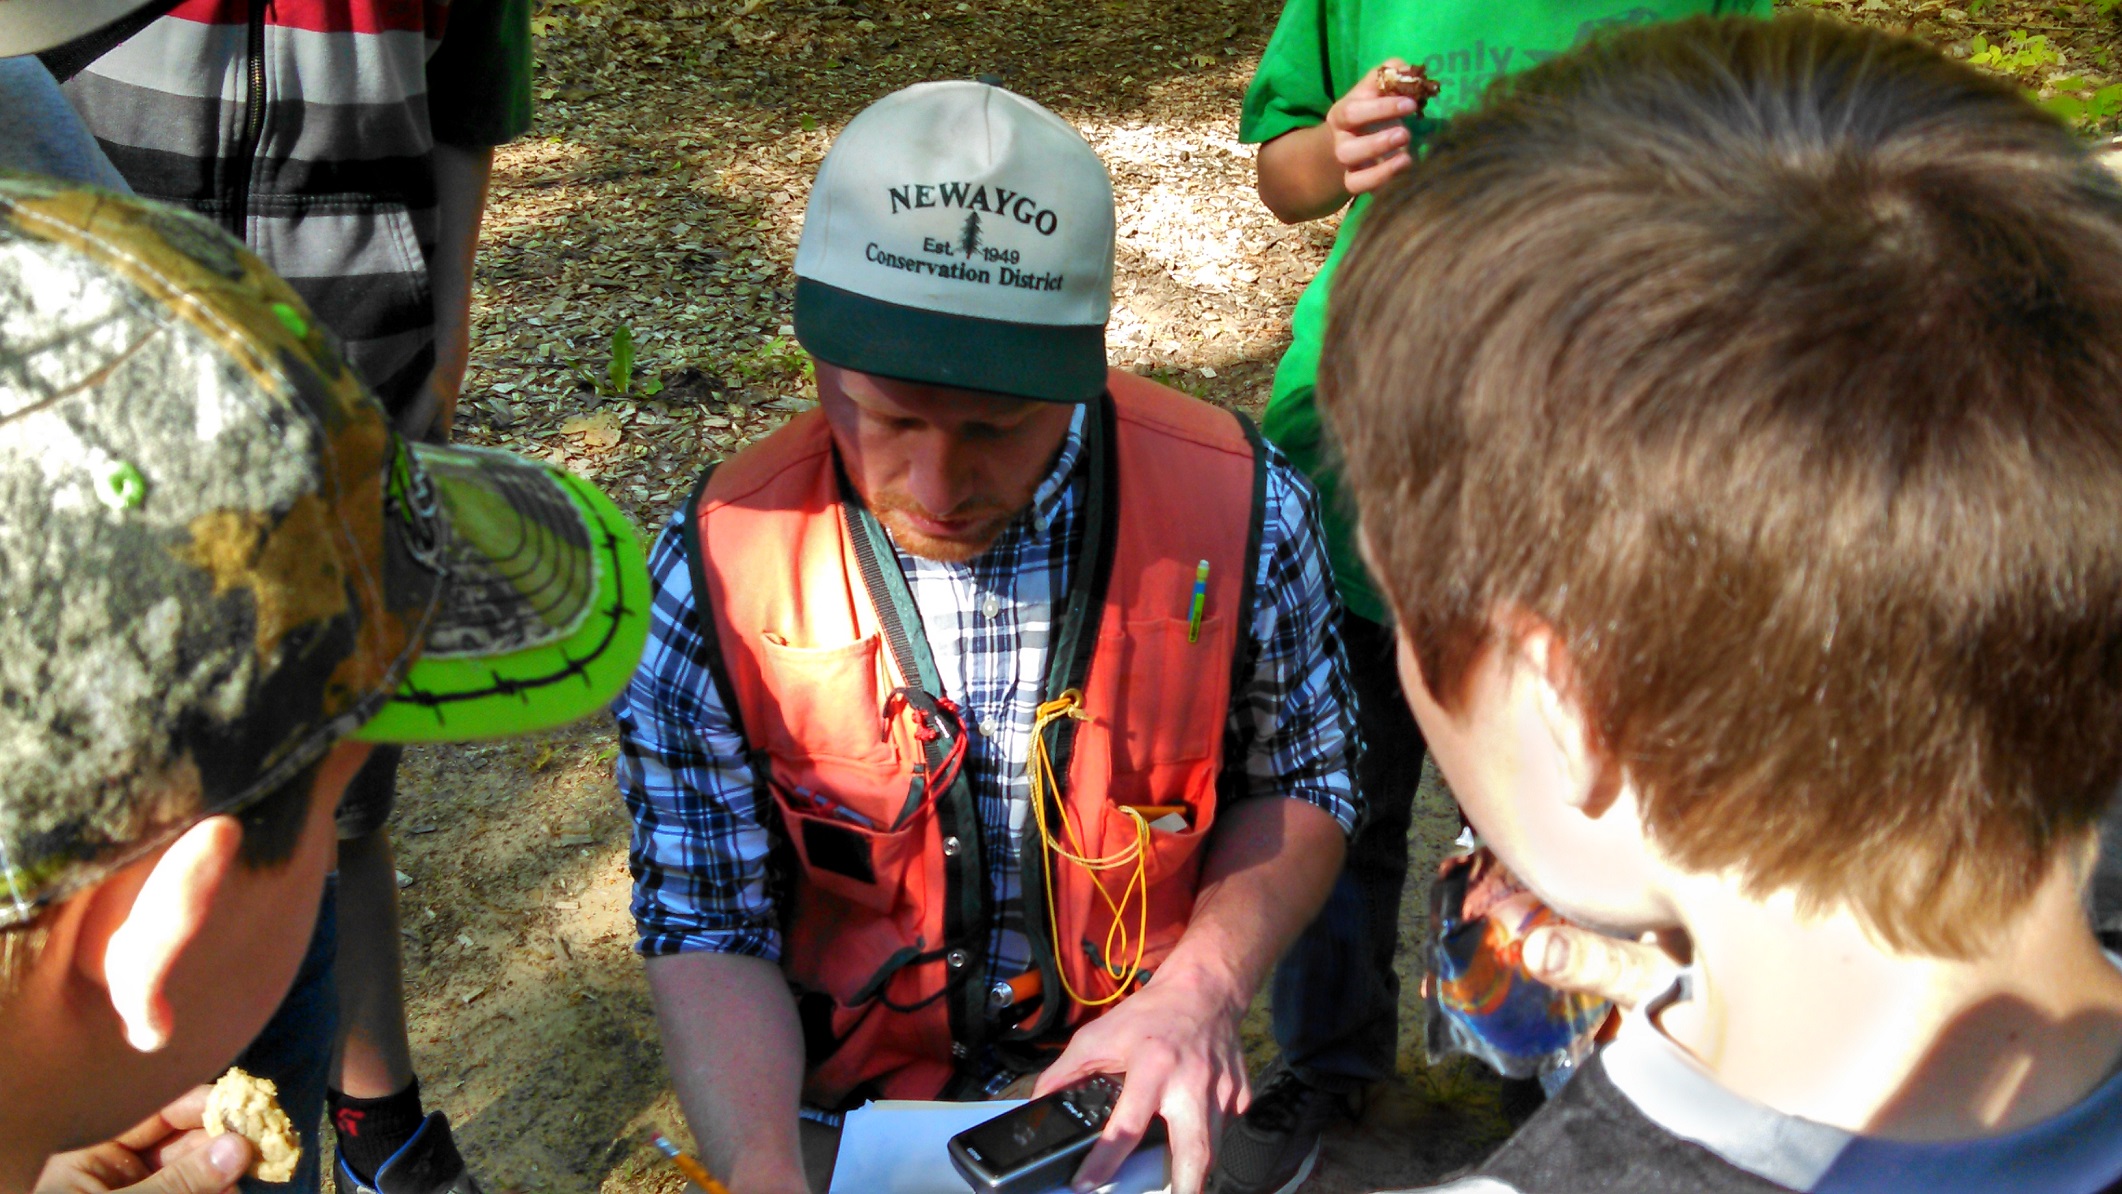 District Forester AJ Smith explains GPS systems to the Newaygo County Boy Scouts